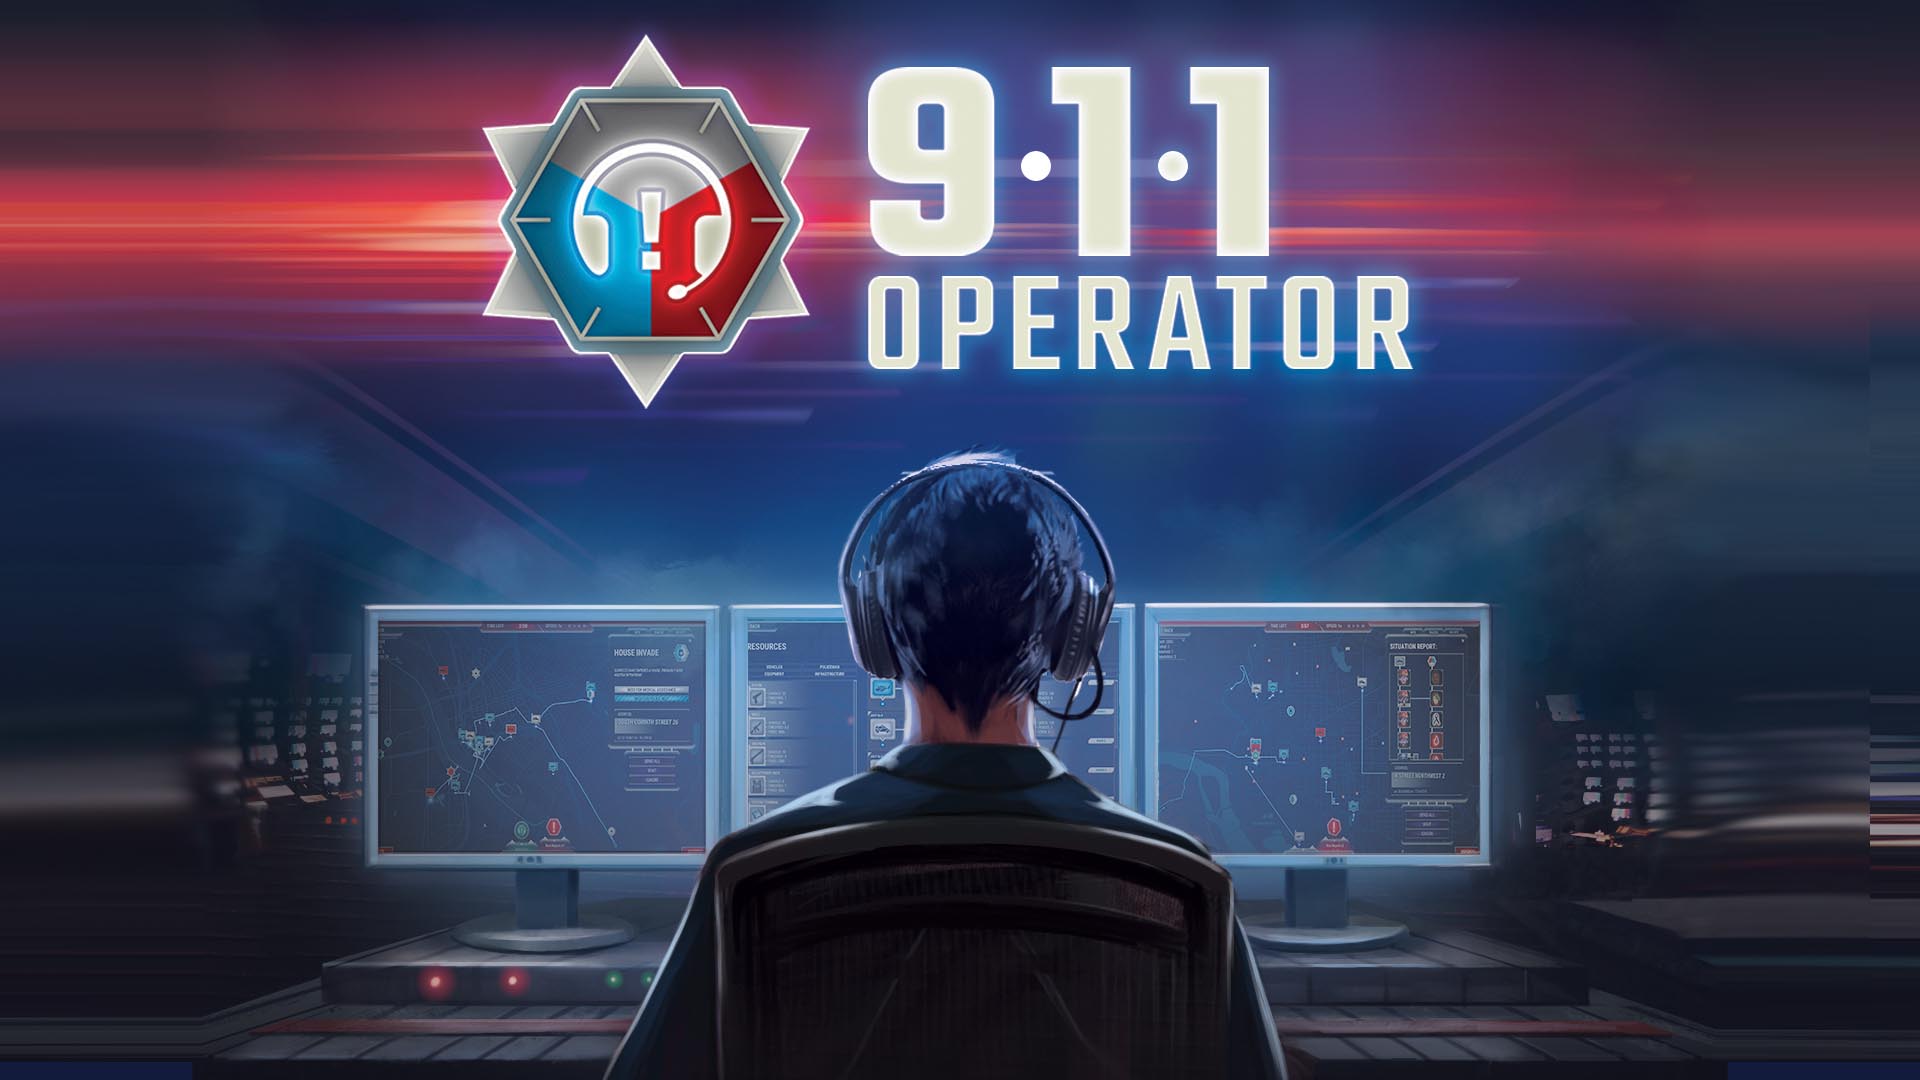 Emergency Dispatch Center Wallpaper From Operator